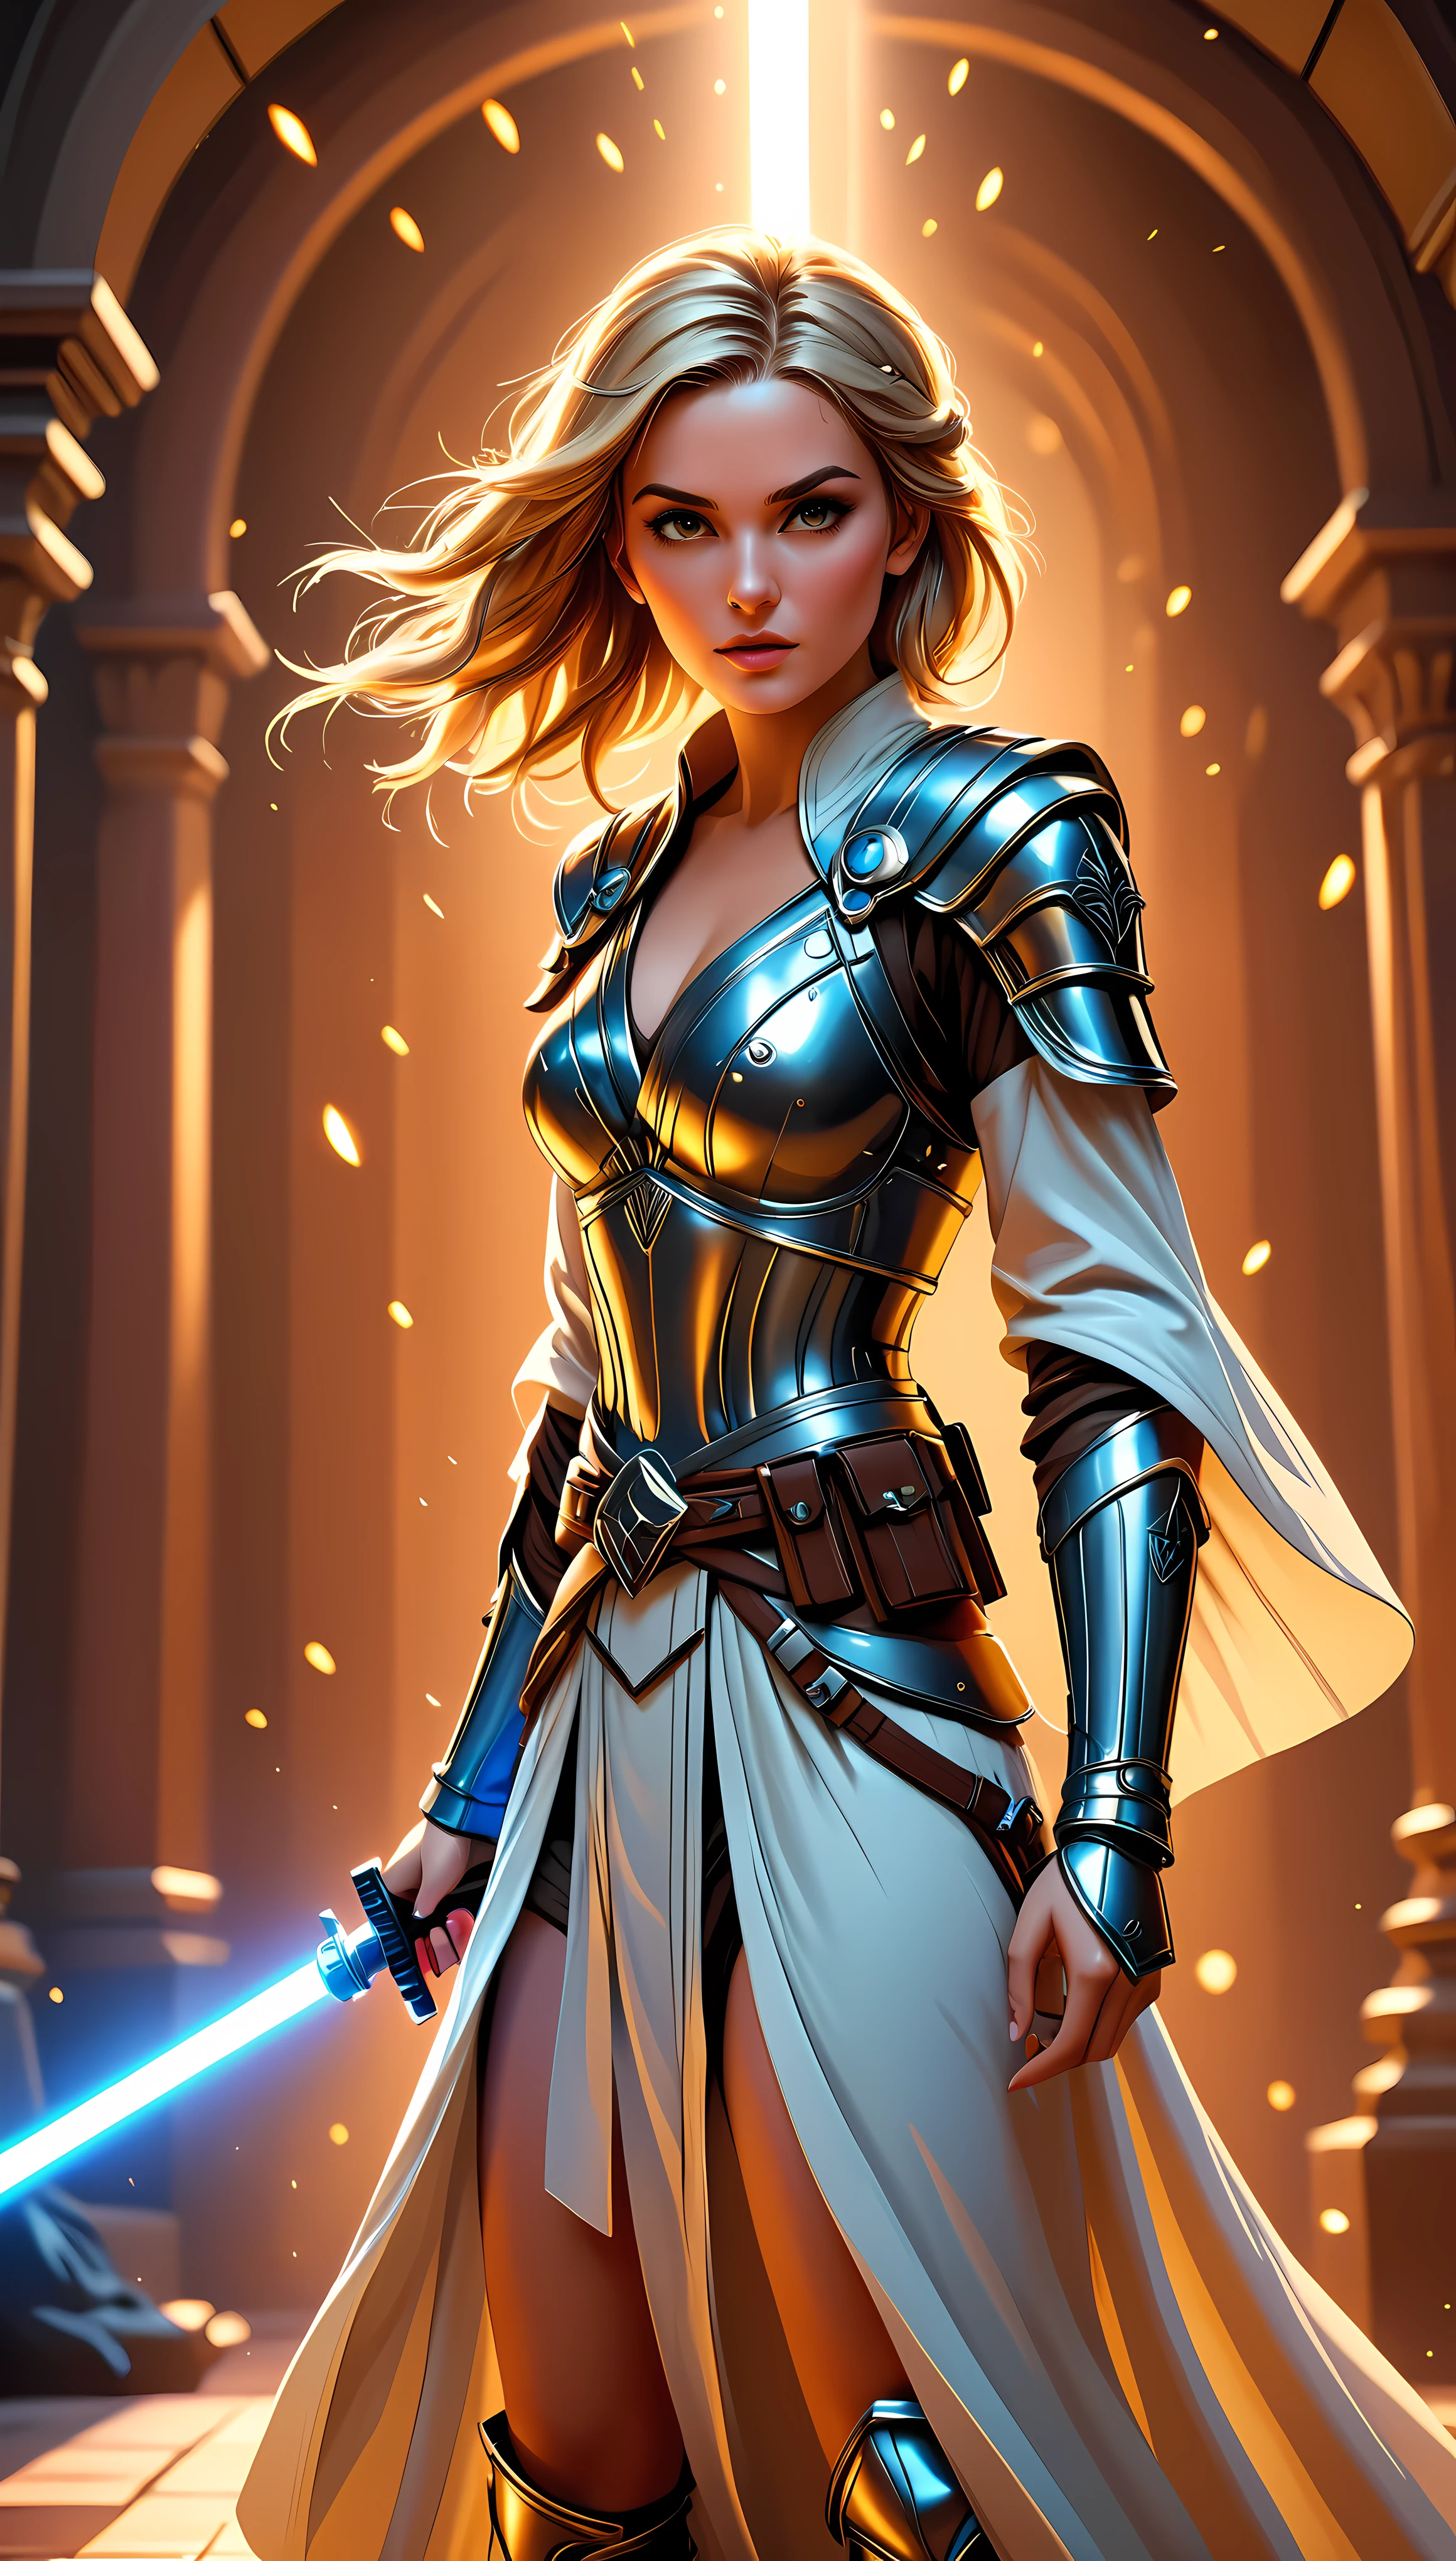 ((Masterpiece in maximum 16K resolution):1.6), ((vector cartoon illustration:)1.5), ((Vector art):1.4), ((Geometric style and minimalism):1.5), ((Wide angle painting):1.2) | (Cinematic photo of a fighting Female Jedi), (Supermodel beauty with braided blonde hair and aquiline nose), ((Full body):1.2), ((Jedi Robe):1.2), ((Light Sabre):1.3), ((tyndall effect):1.1), ((golden hour):1.2), ((sense of action):1.1), (shimmer), (visual experience), (Realism), (Realistic), award-winning graphics, dark shot, film grain, extremely detailed, Digital Art, rtx, Unreal Engine, scene concept anti glare effect, All captured with sharp focus. Rendered in ultra-high definition with UHD and retina quality, this masterpiece ensures anatomical correctness and textured skin with super detail. With a focus on high quality and accuracy, this award-winning portrayal captures every nuance in stunning 16k resolution, immersing viewers in its lifelike depiction. Avoid extreme angles or exaggerated expressions to maintain realism. ((perfect_composition, perfect_design, perfect_layout, perfect_detail, ultra_detailed)), ((enhance_all, fix_everything)), More Detail, Enhance. Rendered in ultra-high definition with UHD and retina quality, this masterpiece ensures anatomical correctness and textured skin with super detail. With a focus on high quality and accuracy, this award-winning portrayal captures every nuance in stunning 16k resolution, immersing viewers in its lifelike depiction. Avoid extreme angles or exaggerated expressions to maintain realism. ((perfect_composition, perfect_design, perfect_layout, perfect_detail, ultra_detailed)), ((enhance_all, fix_everything)), More Detail, Enhance.